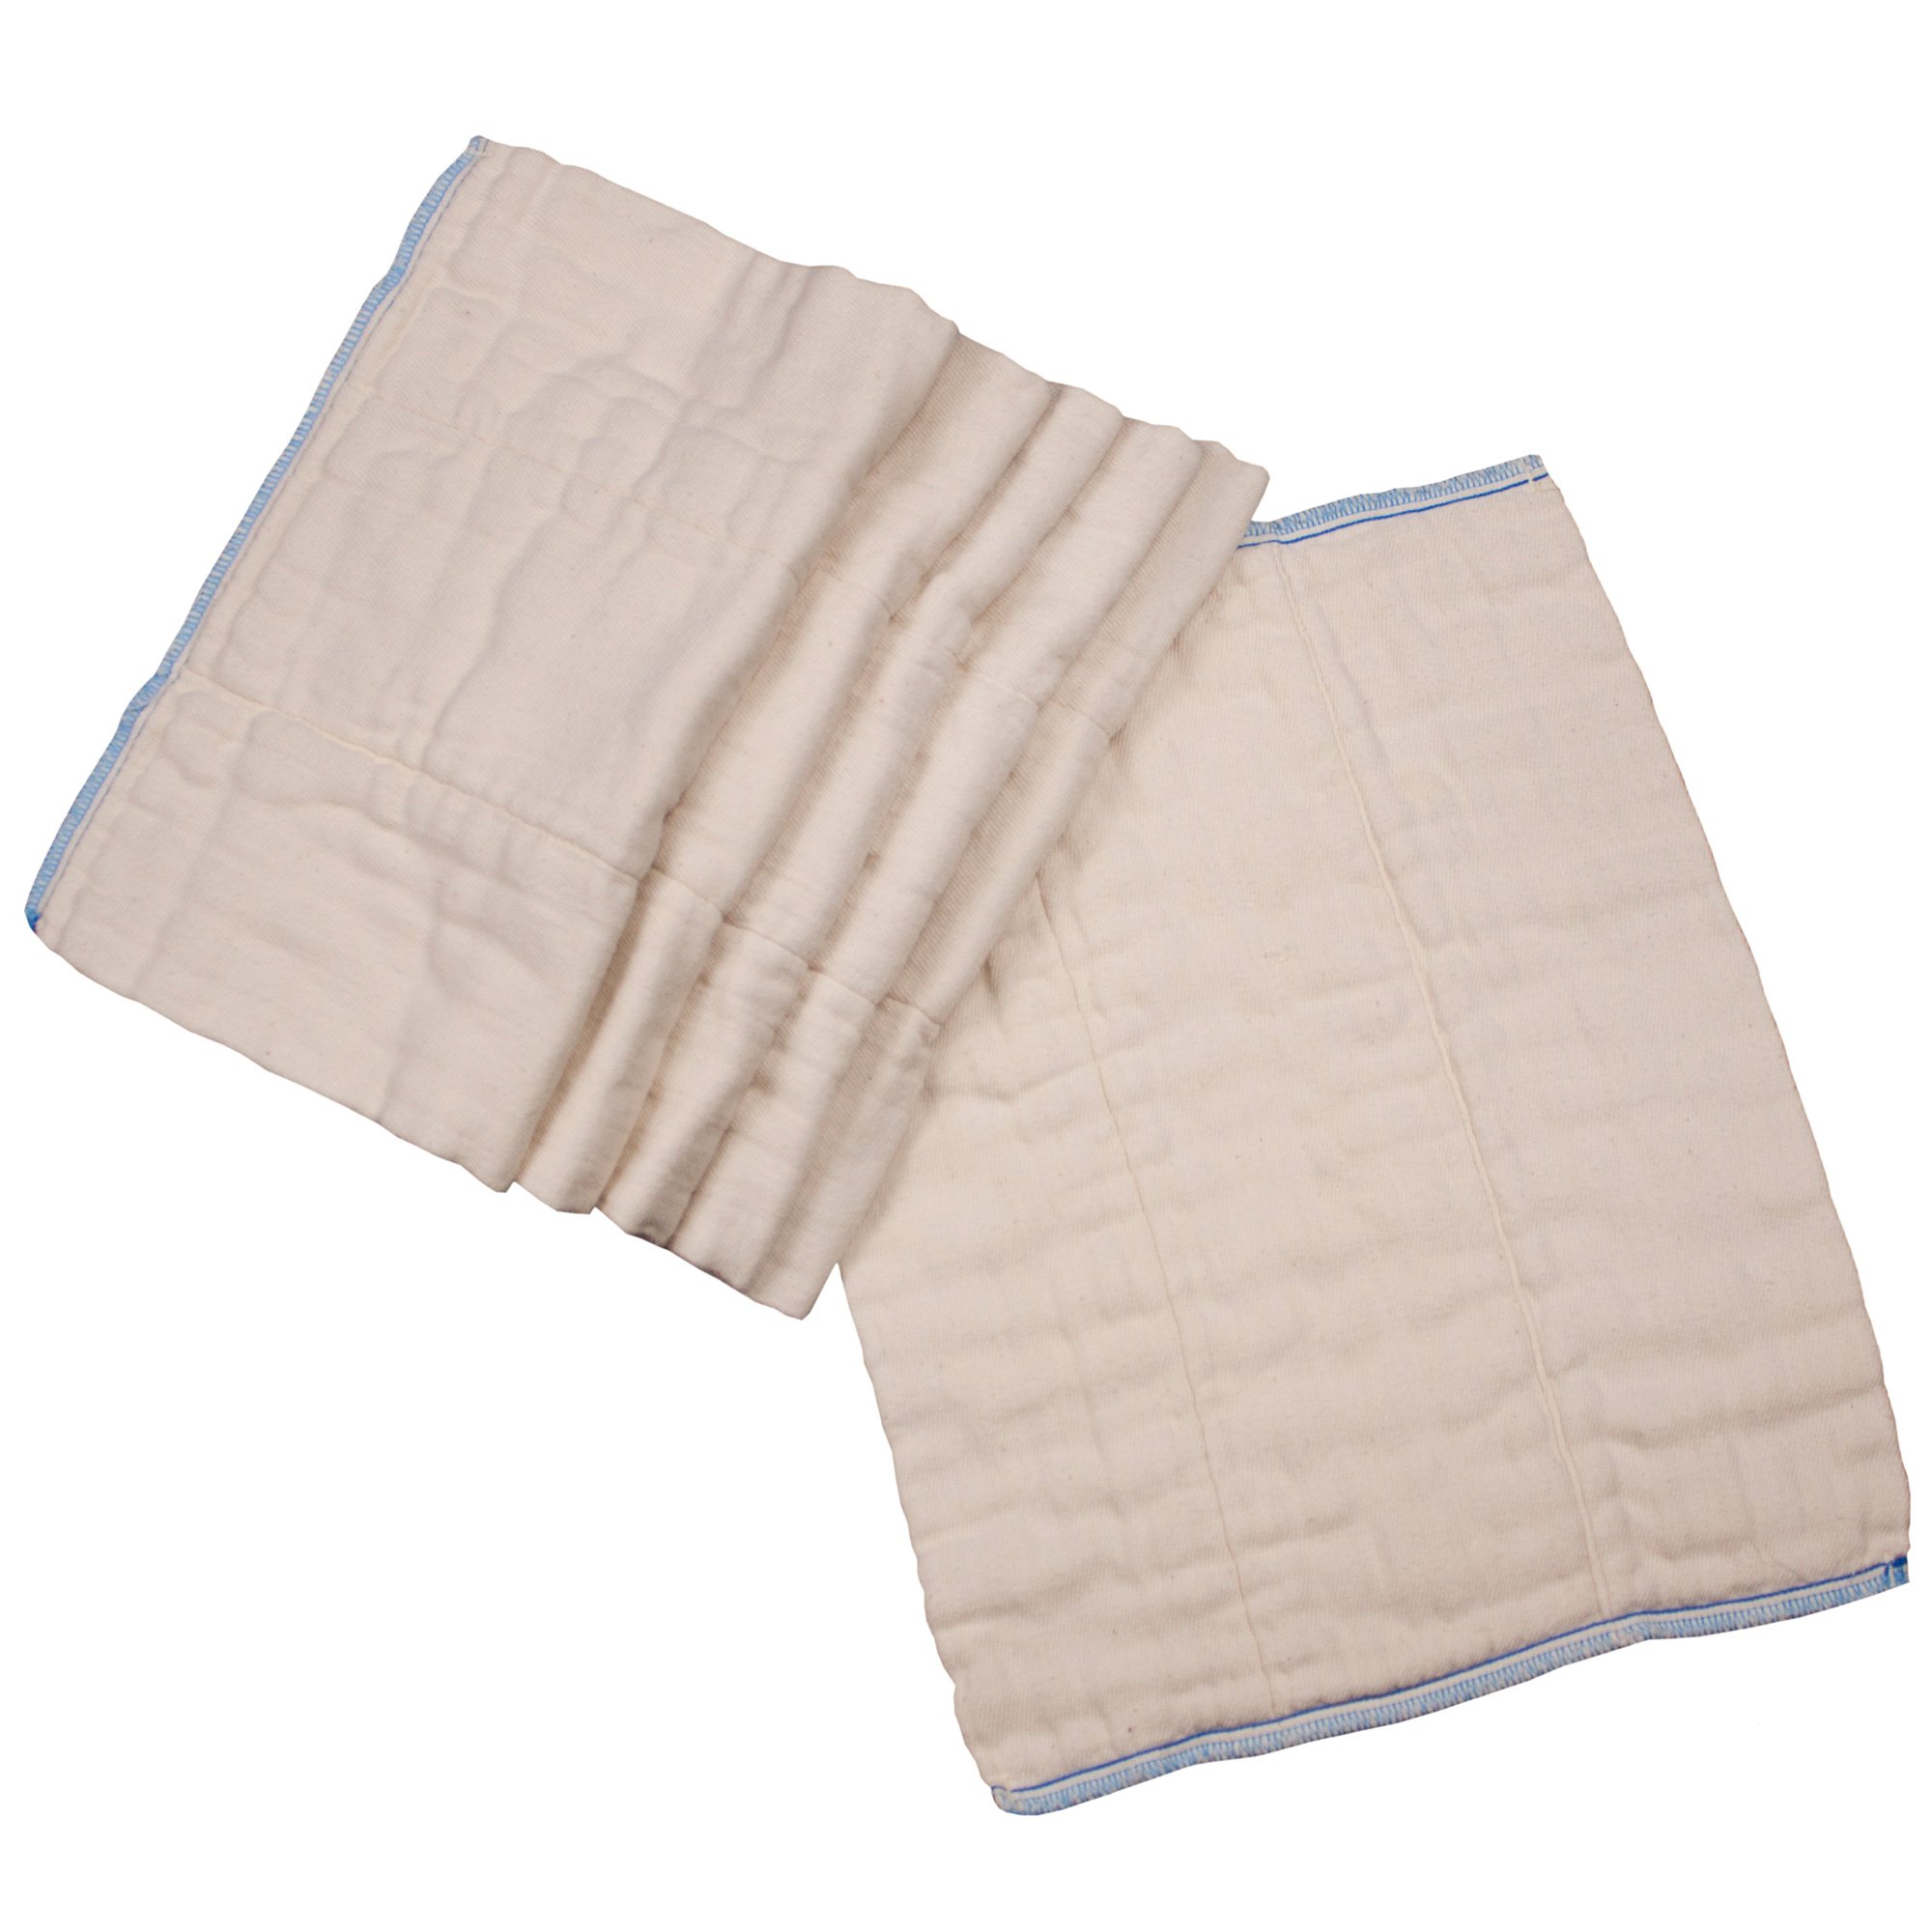 OsoCozy Prefolds Unbleached Cloth Baby Diapers, Size 1 (7-15 lbs), Soft, Absorbent and Durable 100% Natural Cotton, Our Diaper Service Quality Prefolds, Unbleached Natural Color - 6 Pack